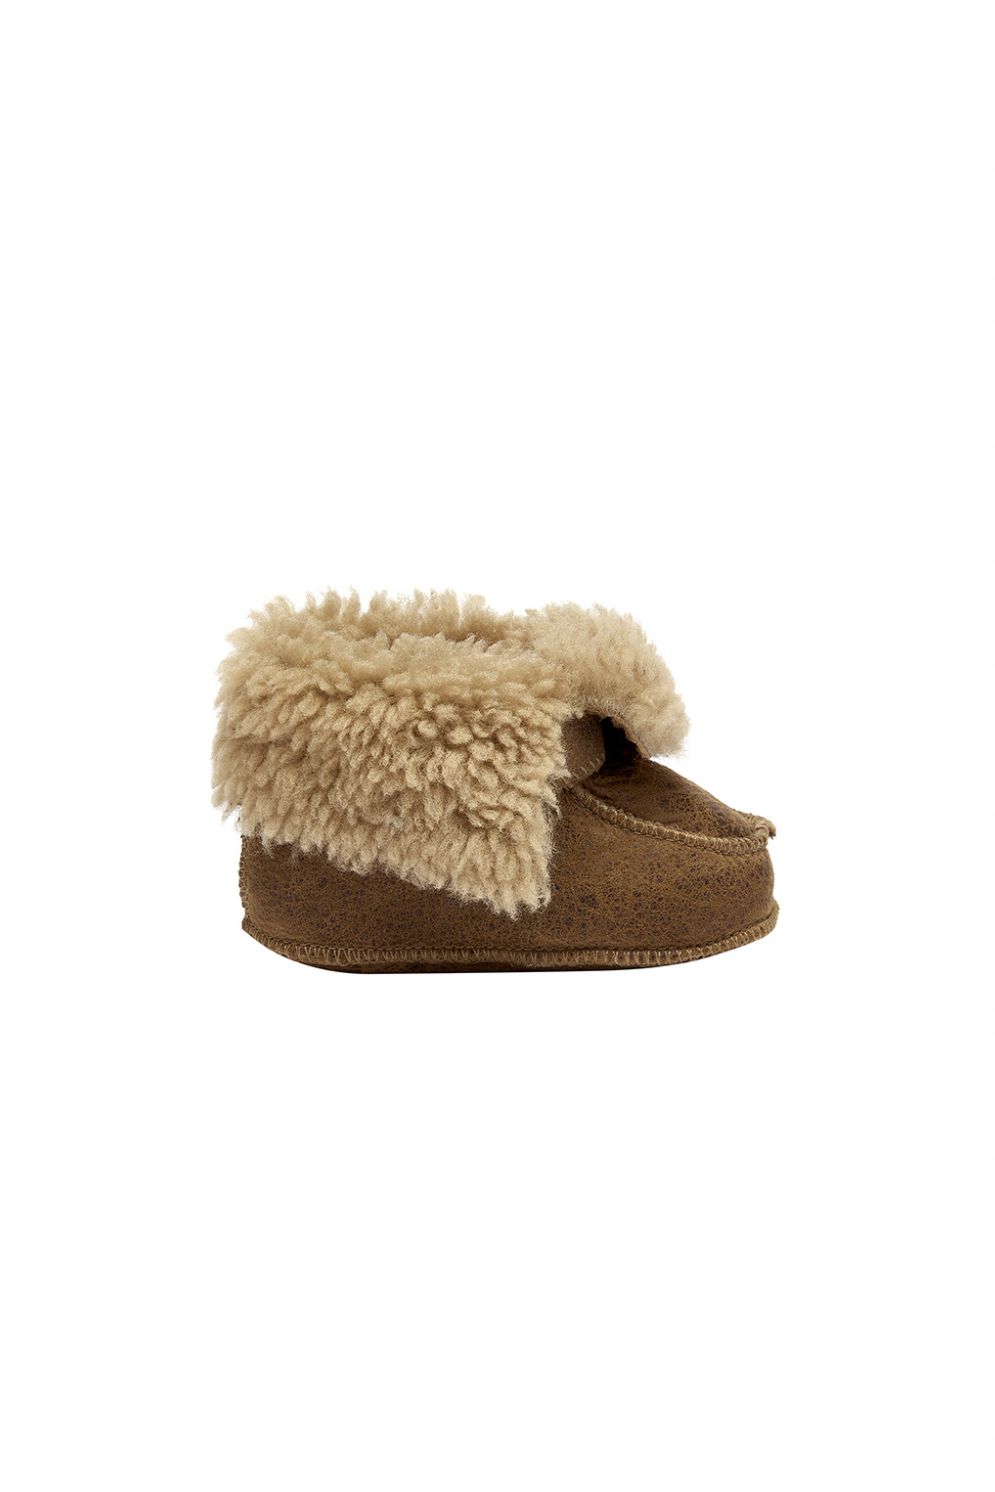 Gushlow & Cole Sheepskin Baby Boots-brown,camel